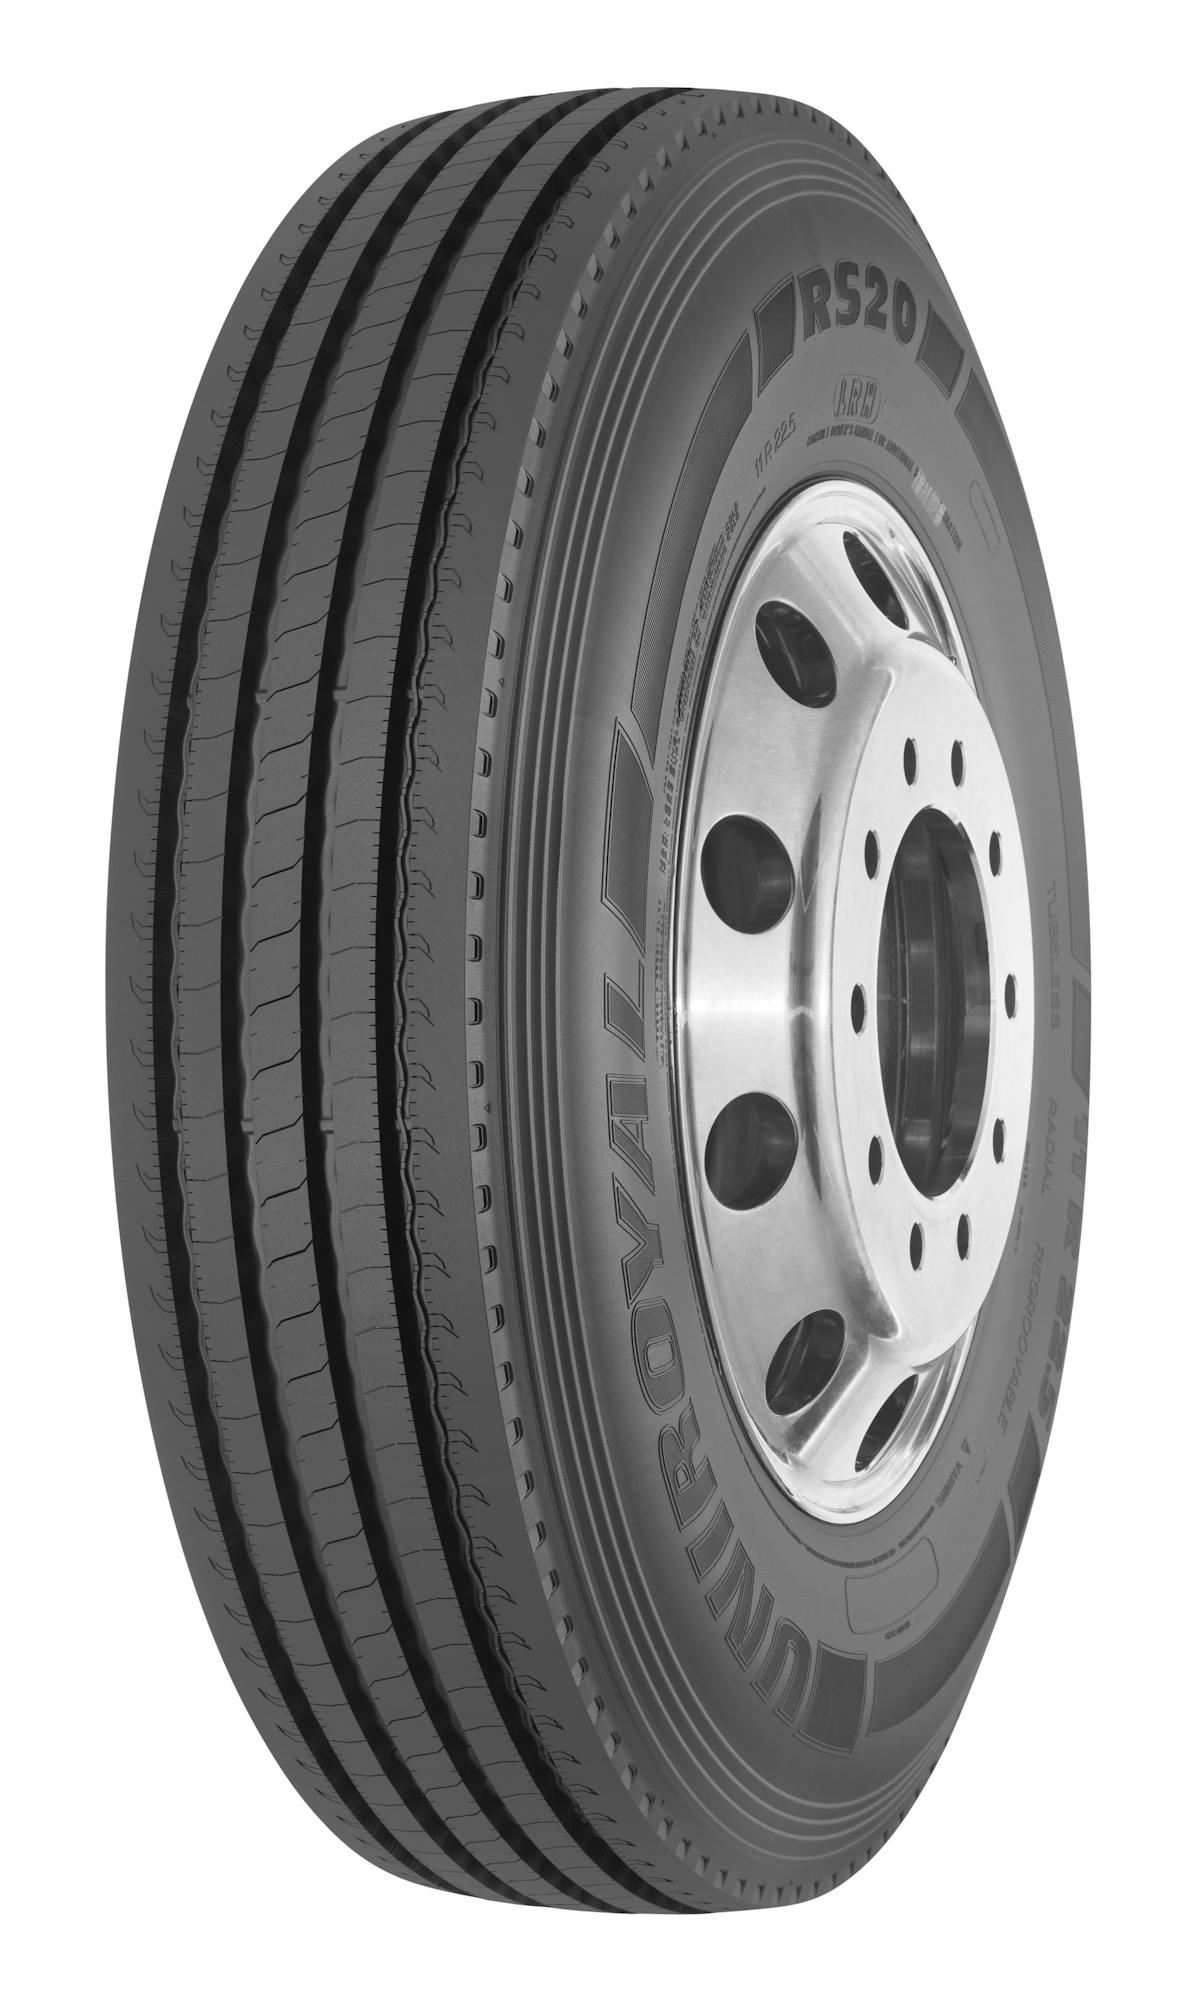 2-sizes-added-to-uniroyal-s-commercial-tire-lineup